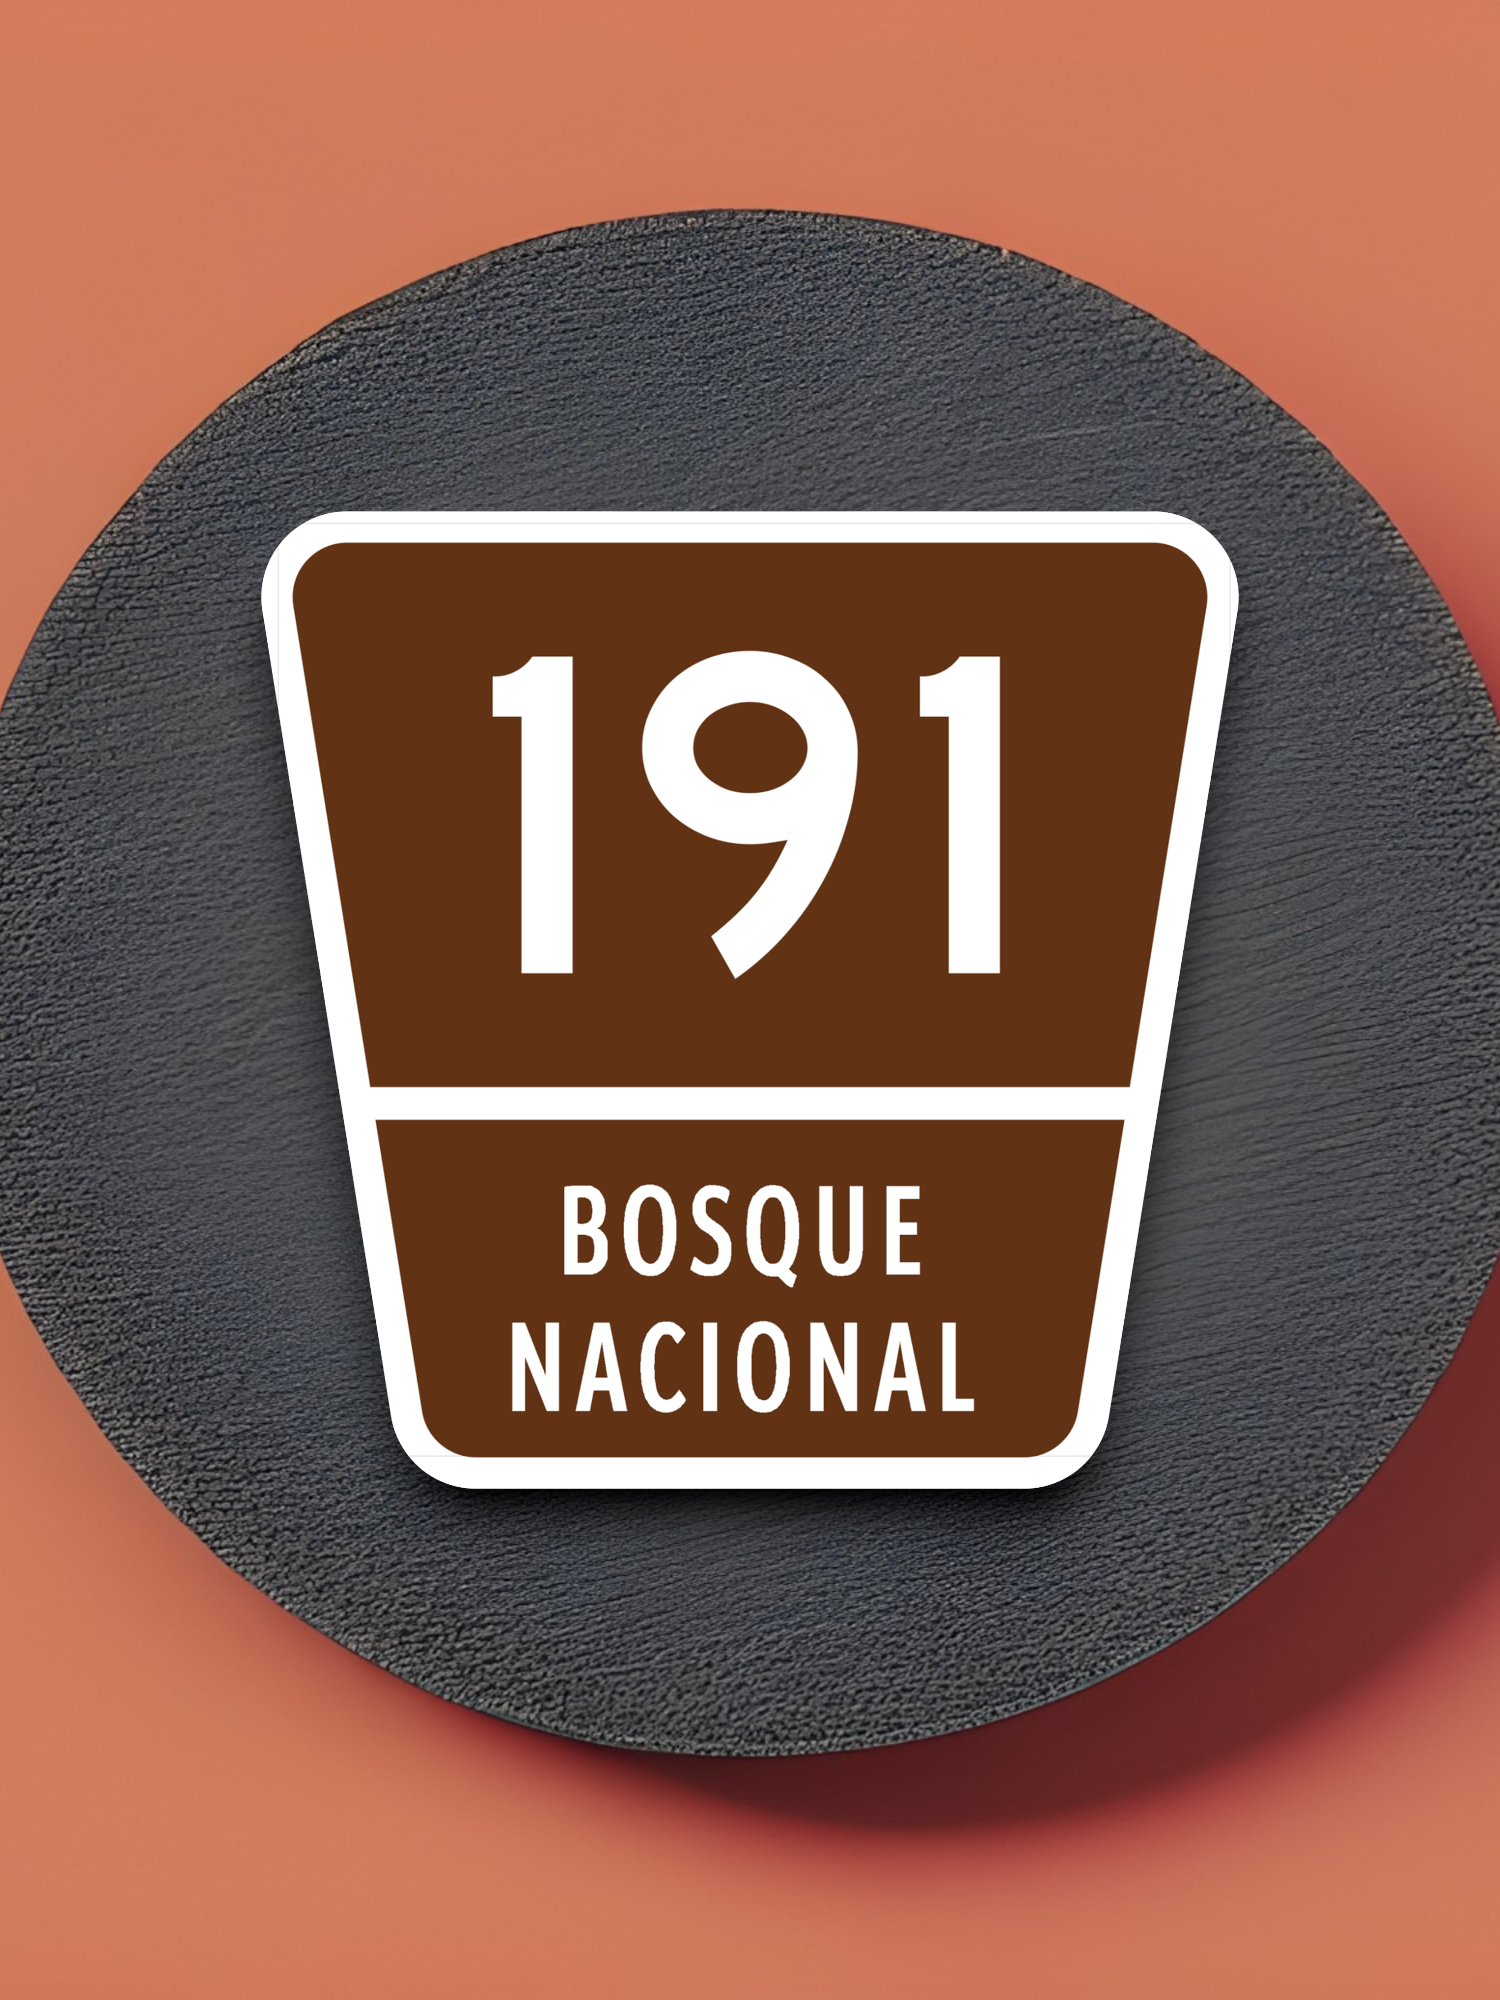 Forest Highway Route 191 - Puerto Rico Sticker